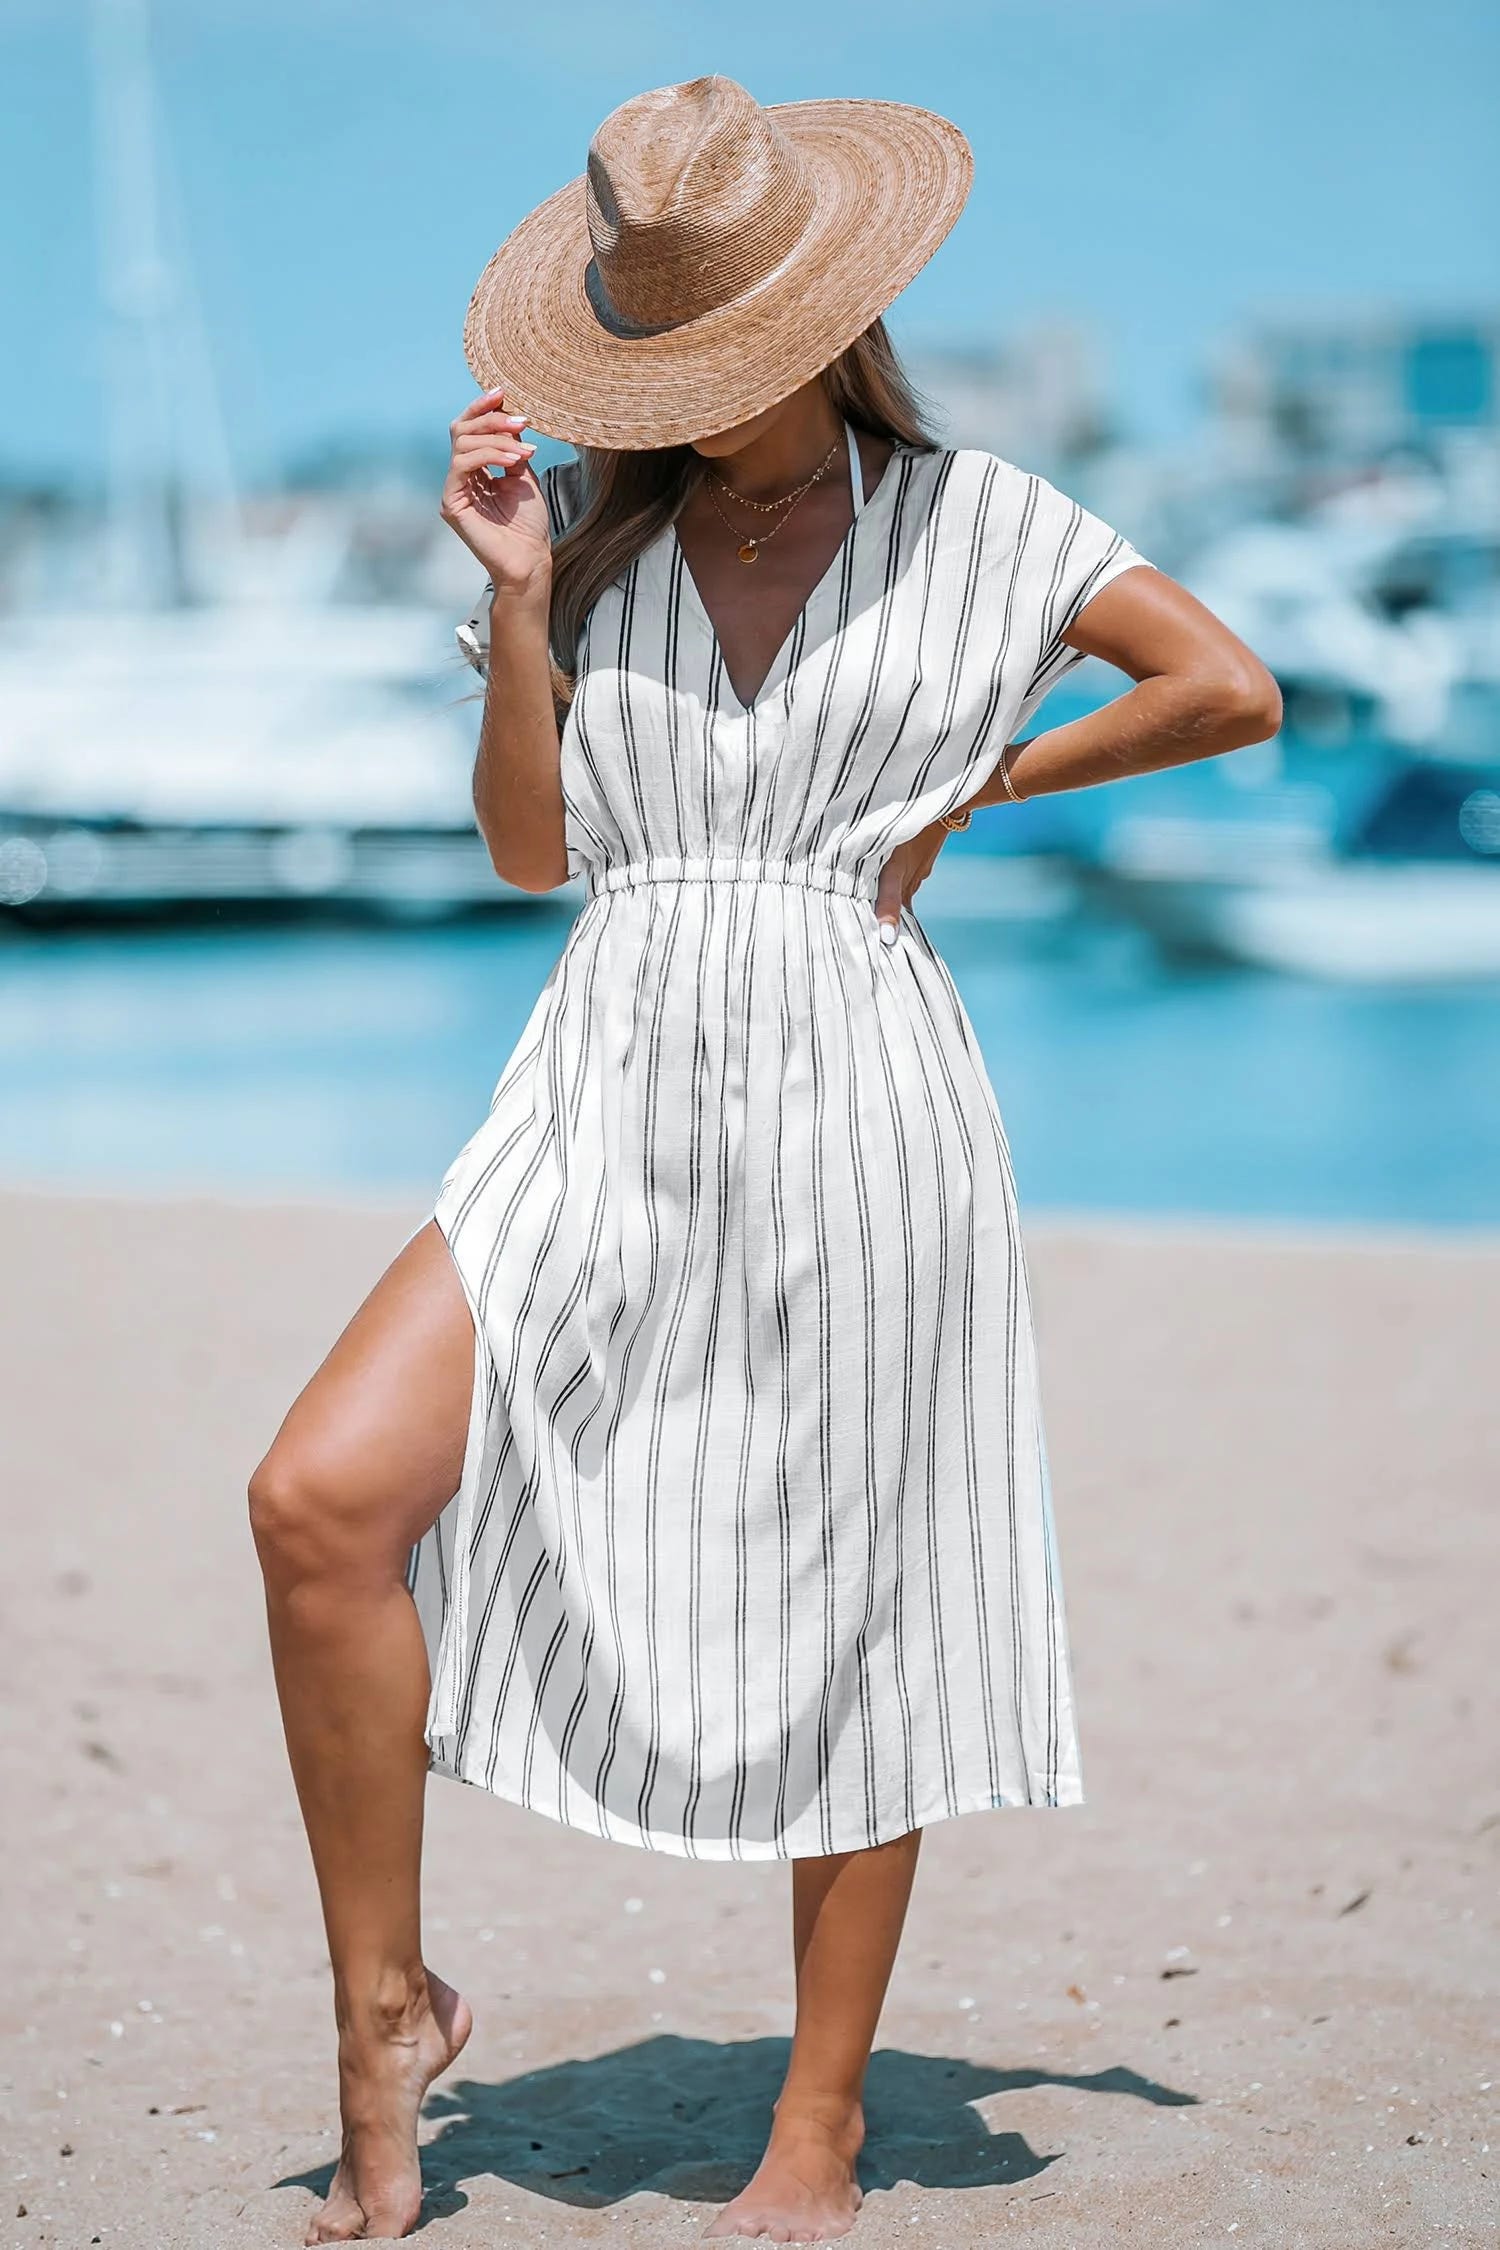 Stylish Midi Cover-Up Dress for Summer Beach Days | Image